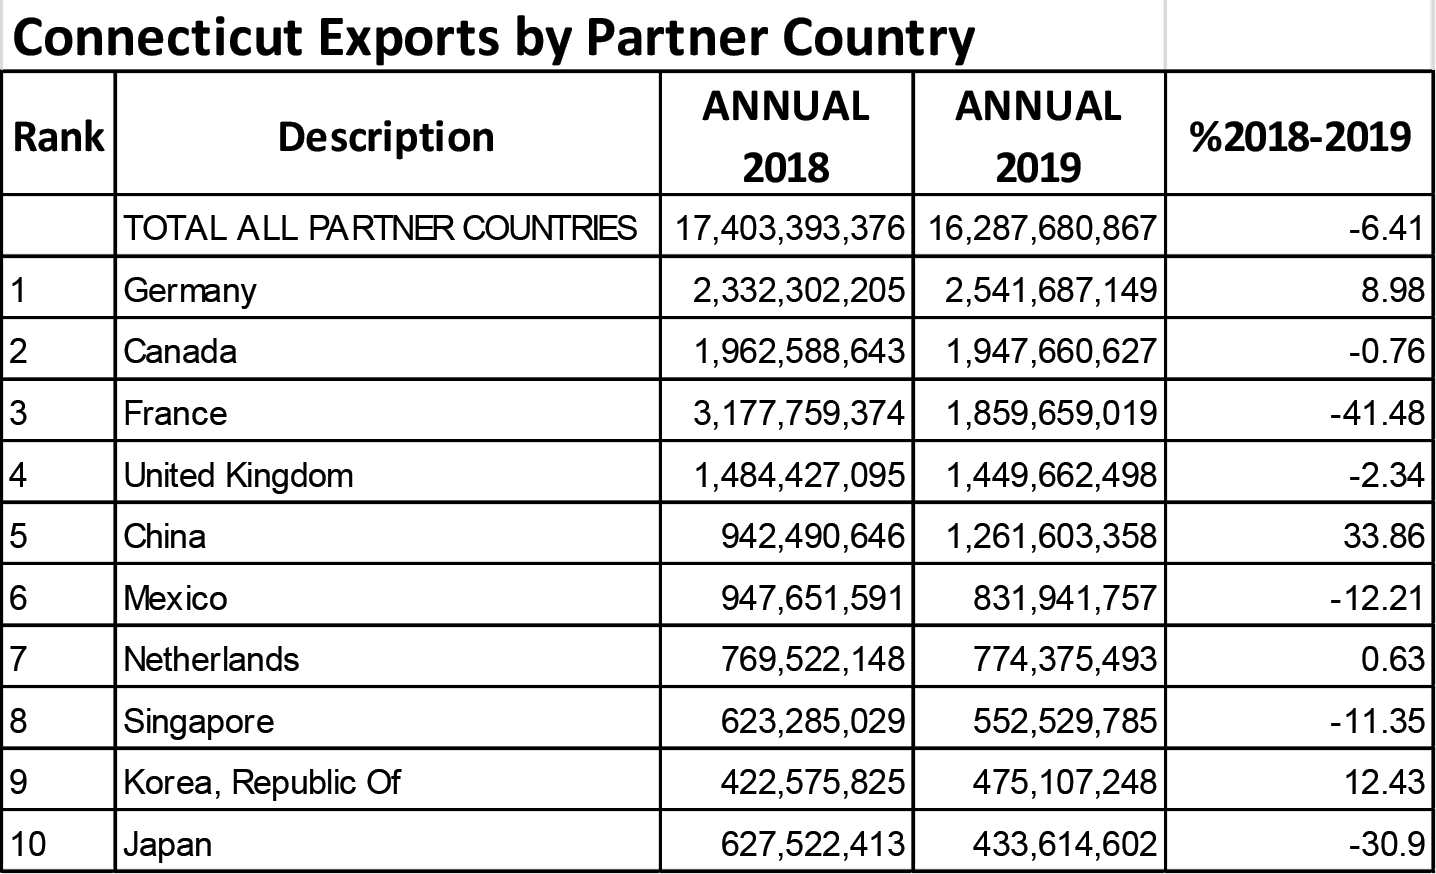 Chart 3. Connecticut Exports by Partner Country